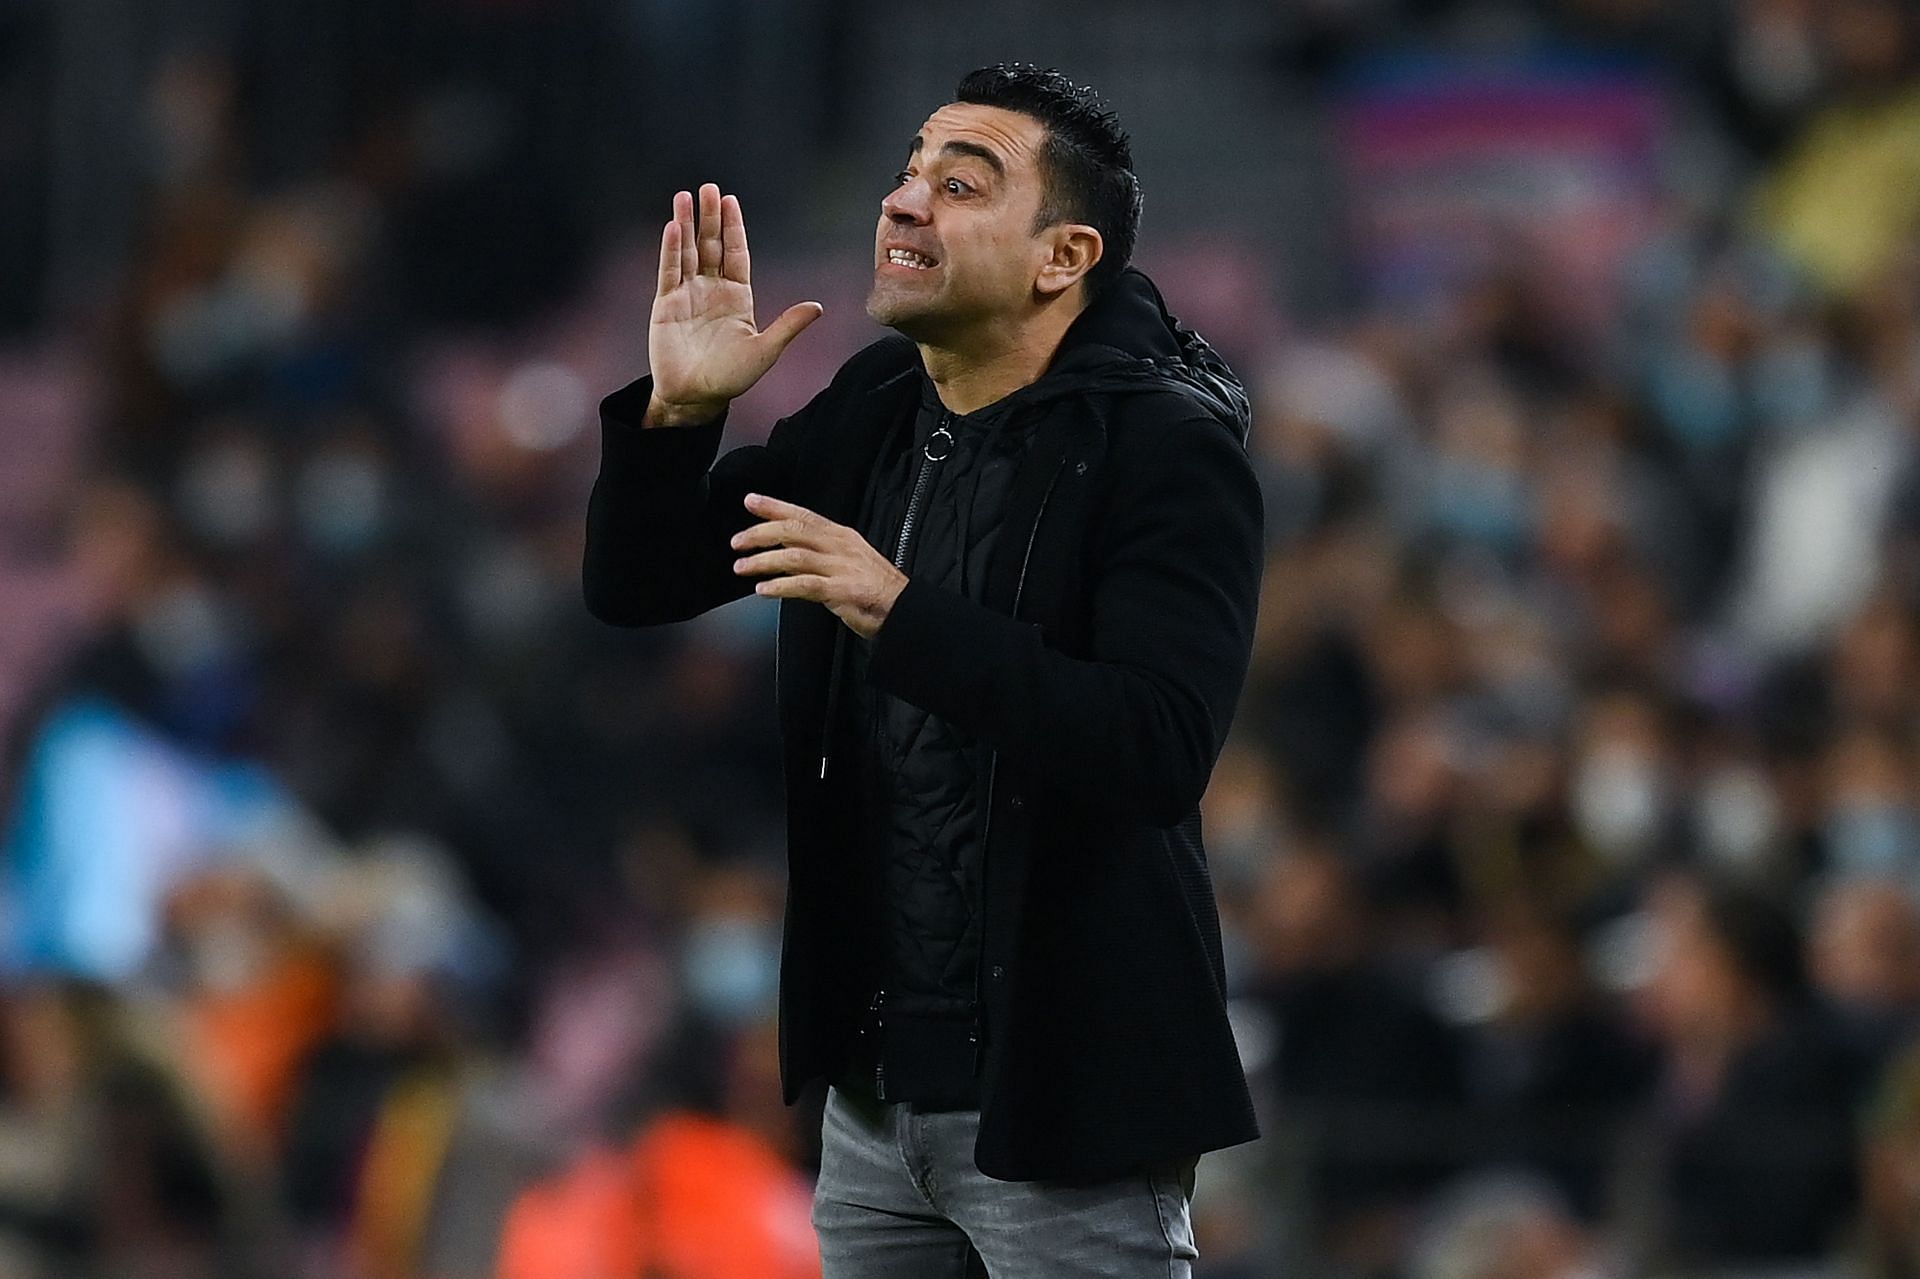 Xavi is back at Barcelona as manager.